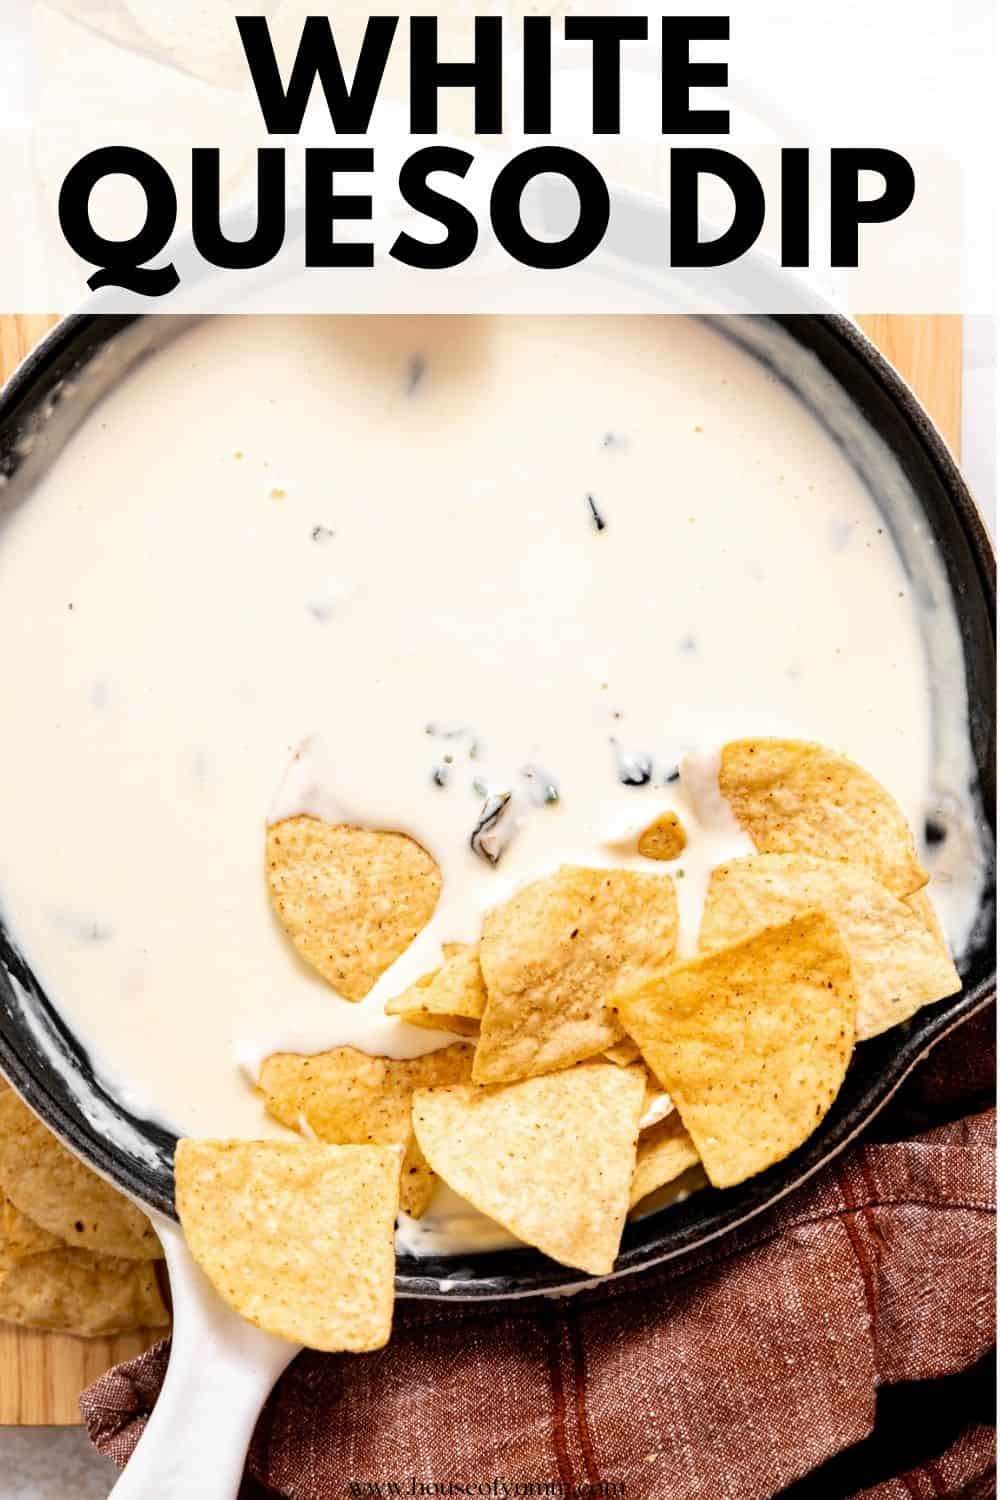 White queso dip with text.